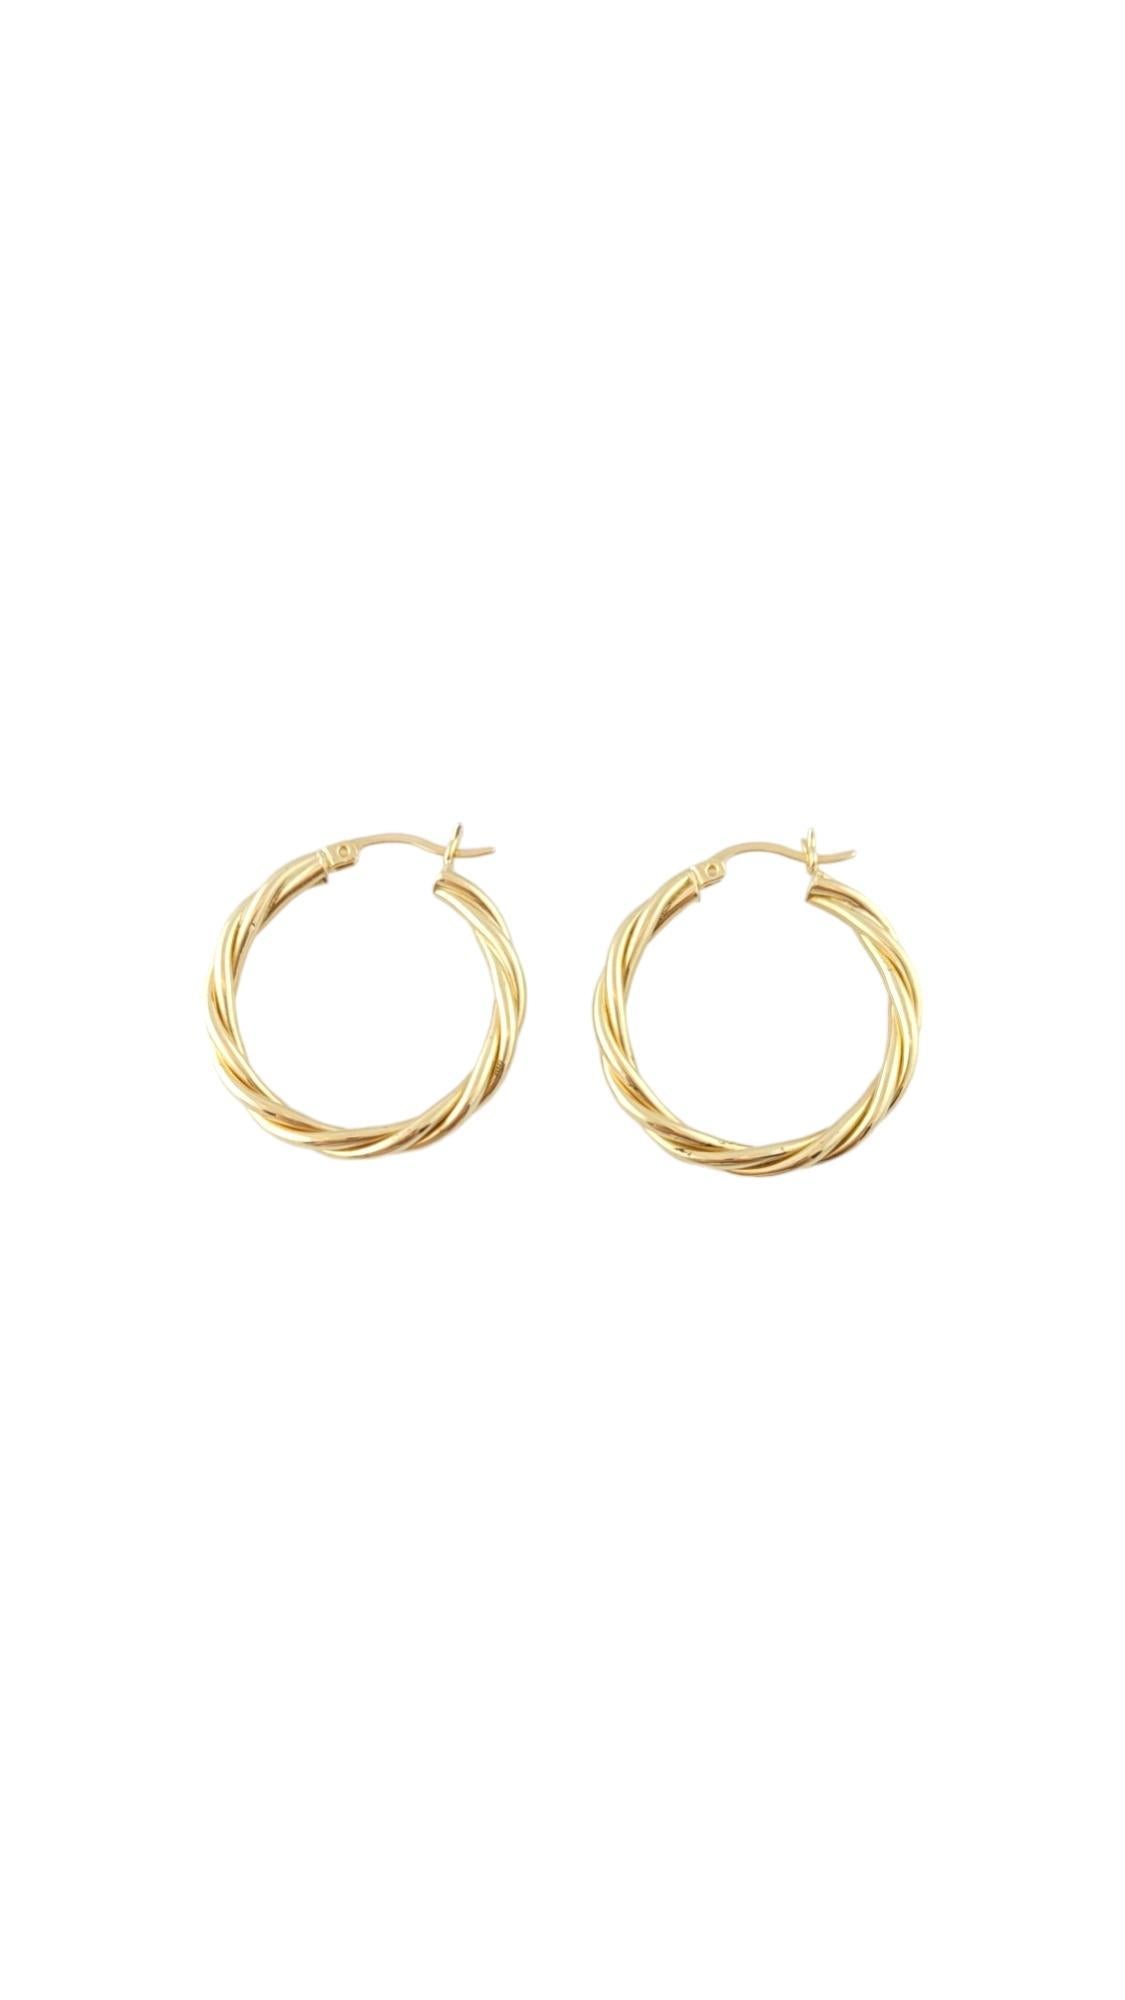 Vintage 14K Yellow Gold Twist Hoops

14 karat yellow gold hoops with an intricate twist design.

Hallmark: EKM14K

Weight: 3.8 g/ 2.5 dwt.

Measurements: 29.92 mm X 3.15 mm

Very good condition, professionally polished.

Will come packaged in a gift